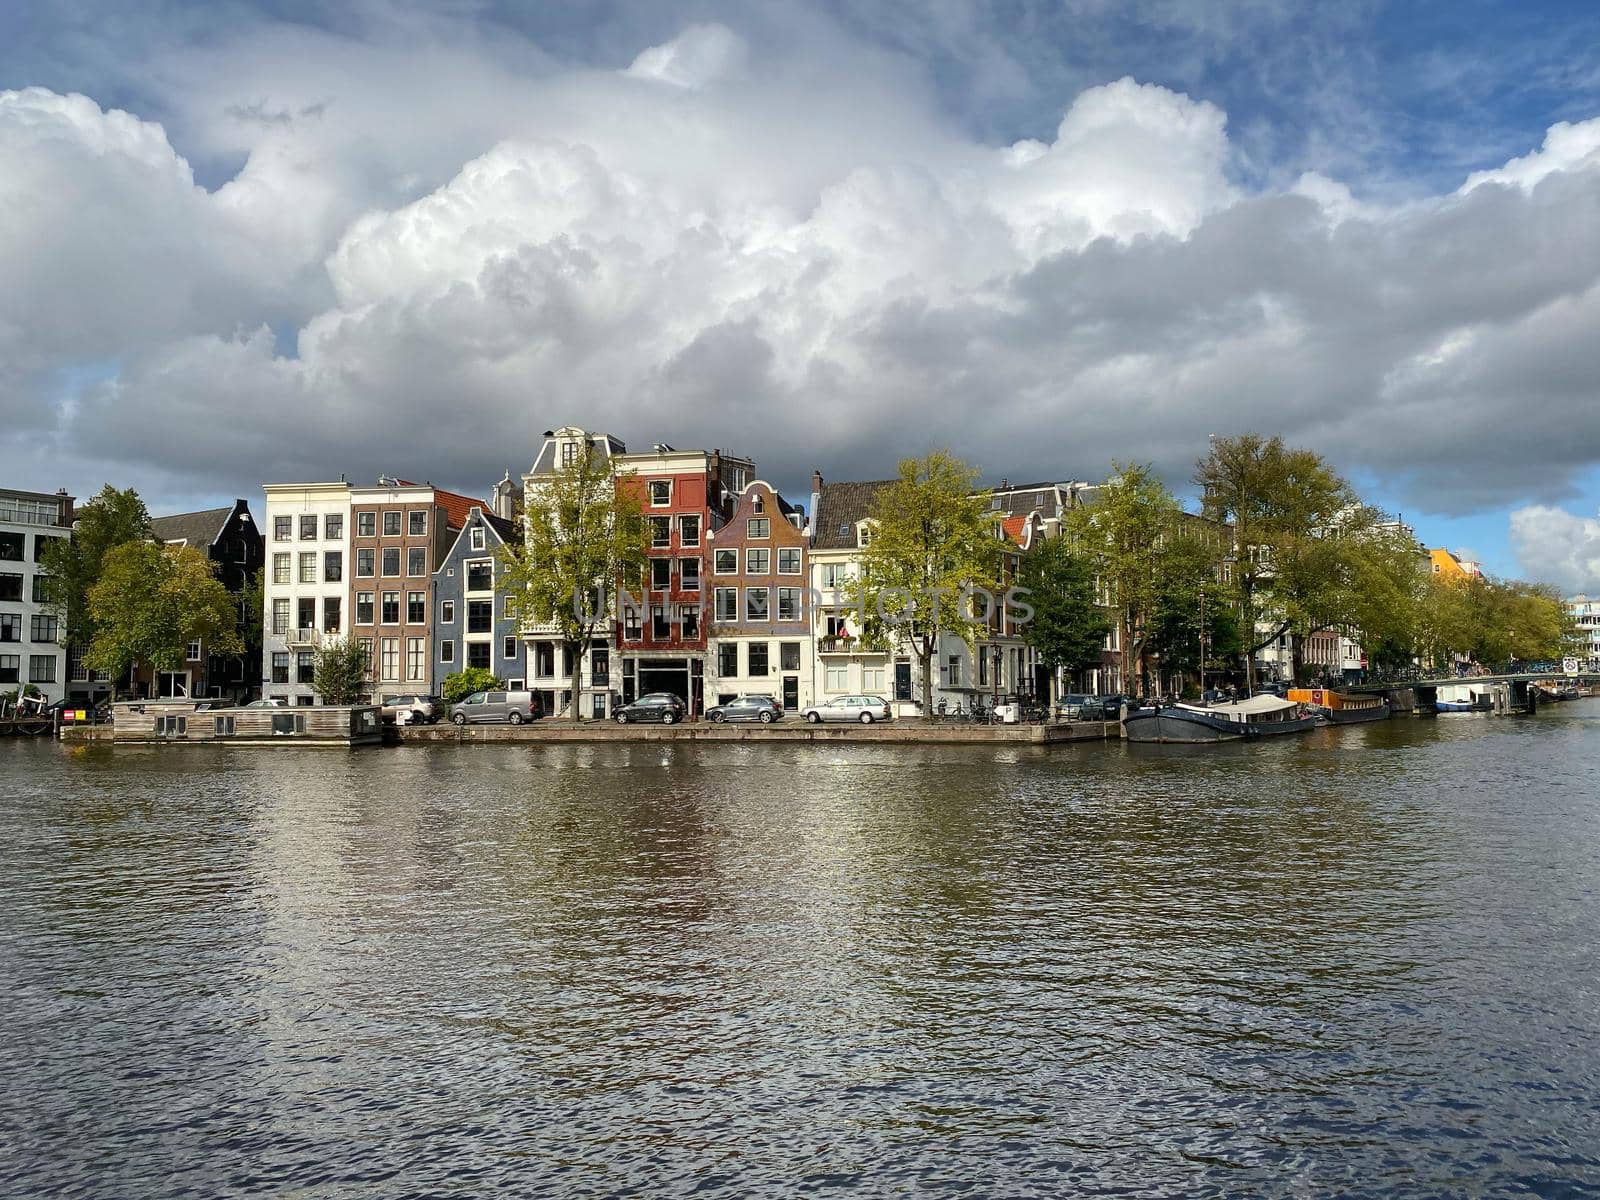 Amsterdam canal with typical dutch houses and houseboats, boats etc. by CaptureLight